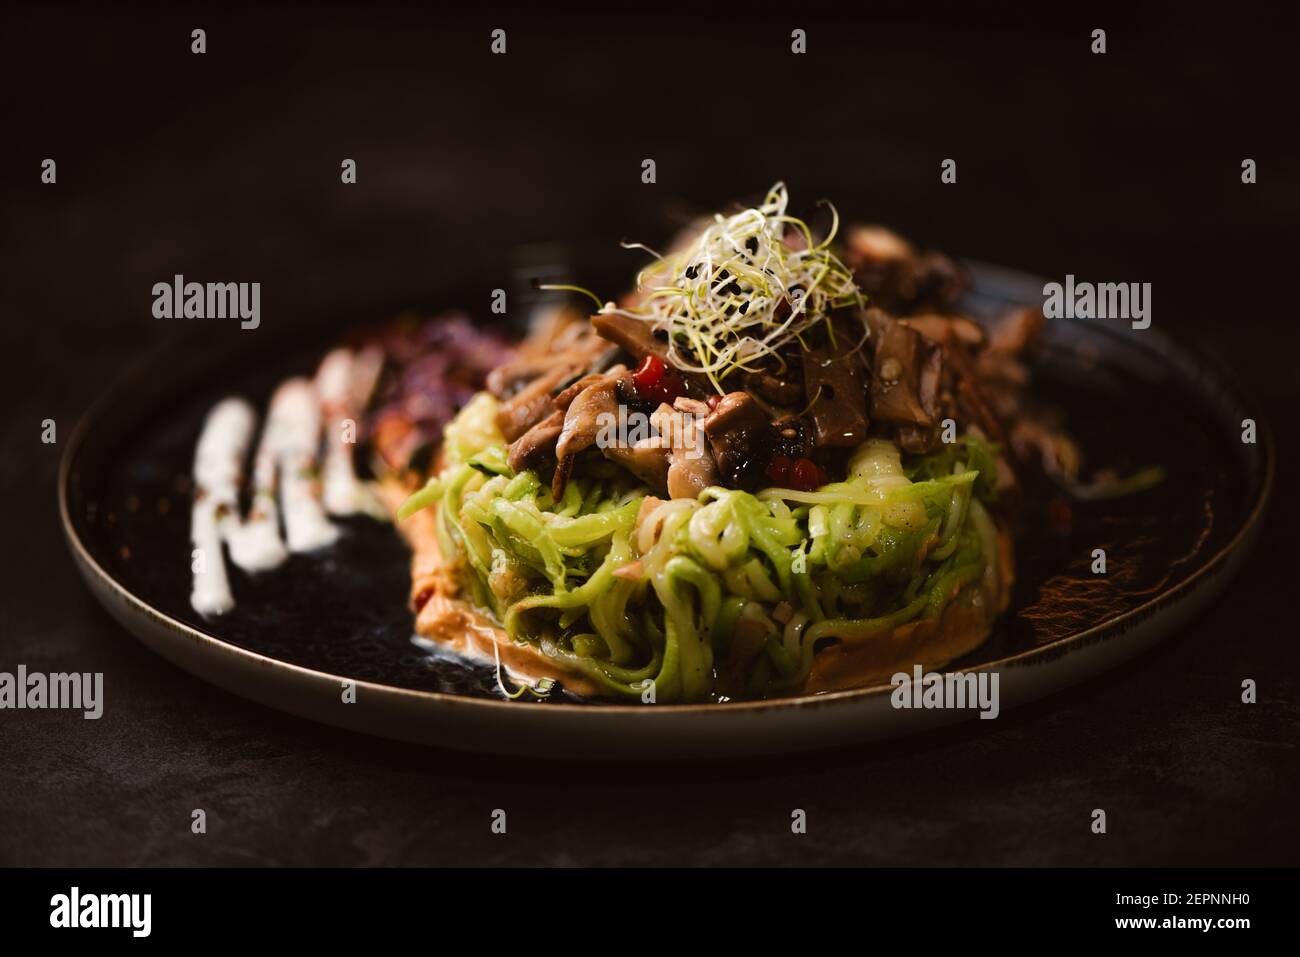 Yummy vegan dish with zucchini spaghetti and sauteed mushroom slices covered with red berries and alfalfa sprouts on dark background Stock Photo